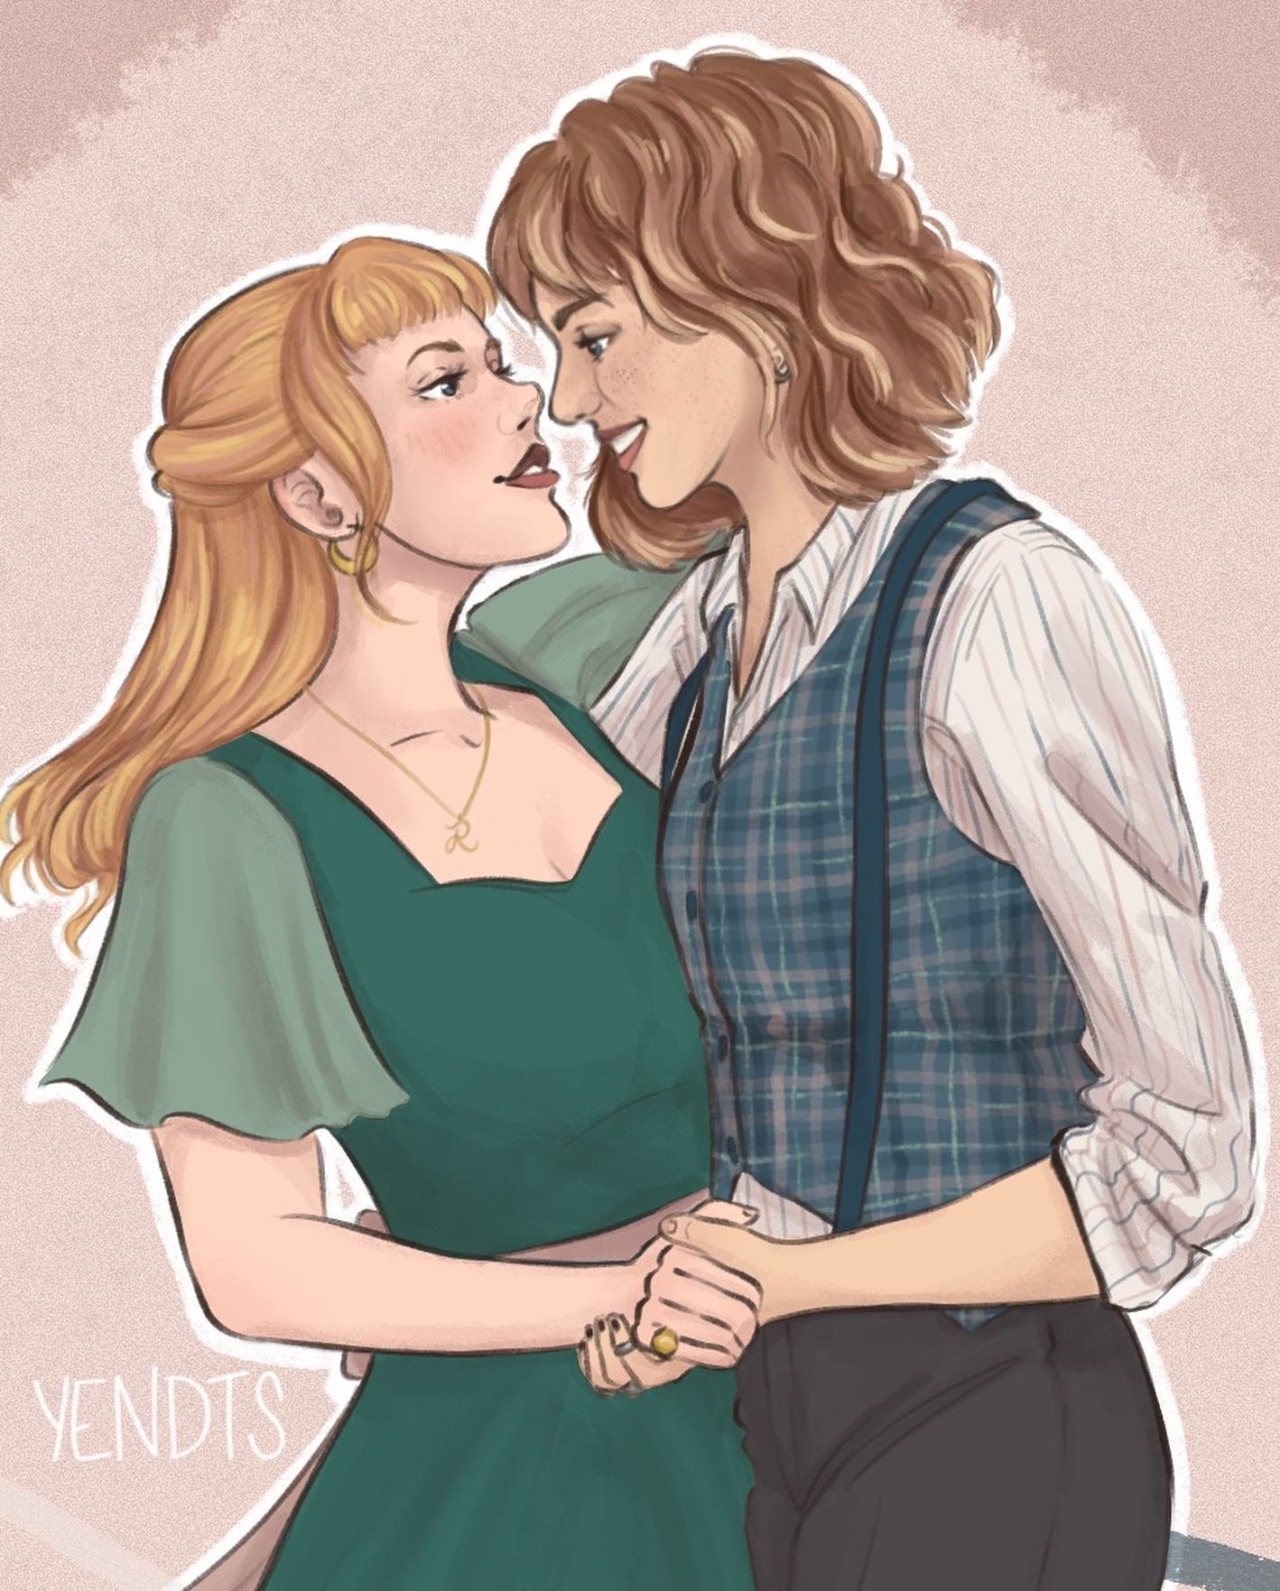 yendts:more buckingham ✨the only thing on my mind recently is chrissy and robin